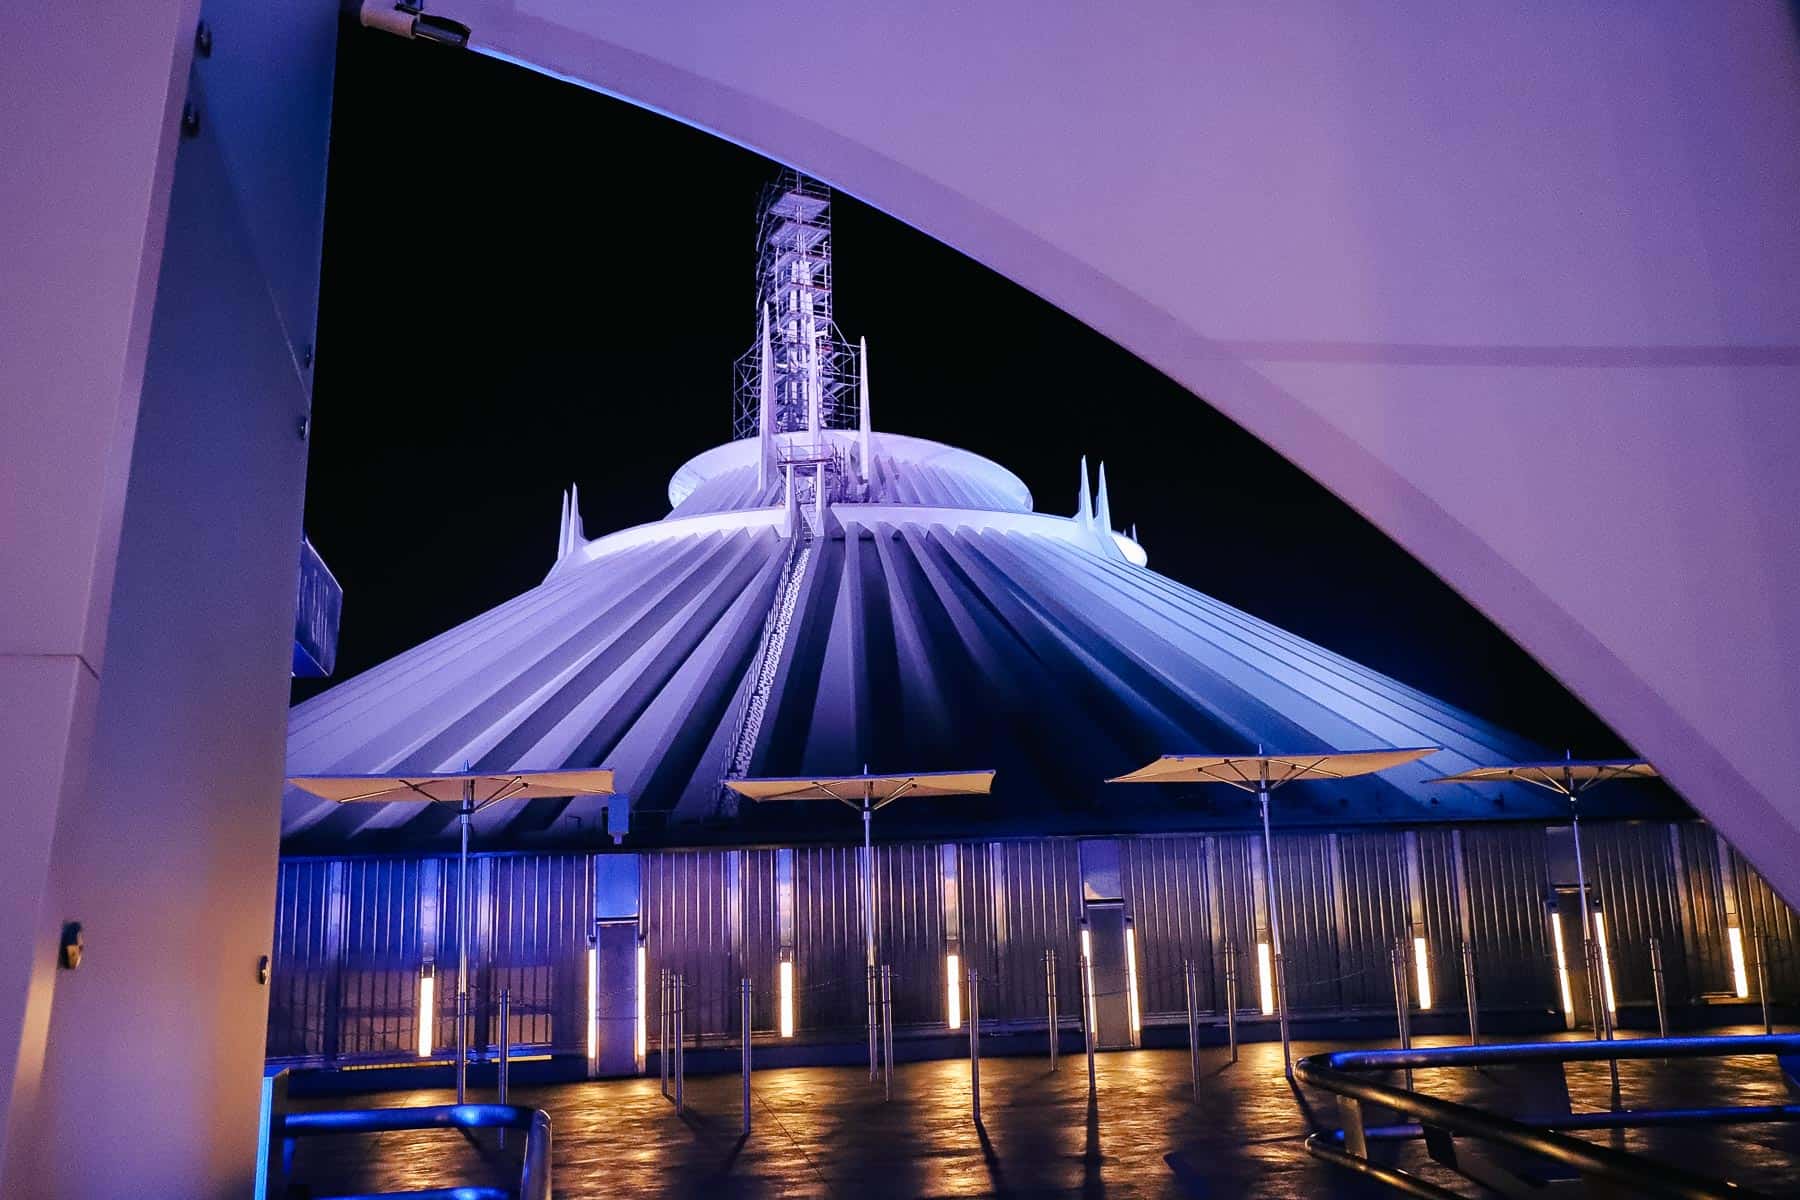 Space Mountain at night from the Tron platform